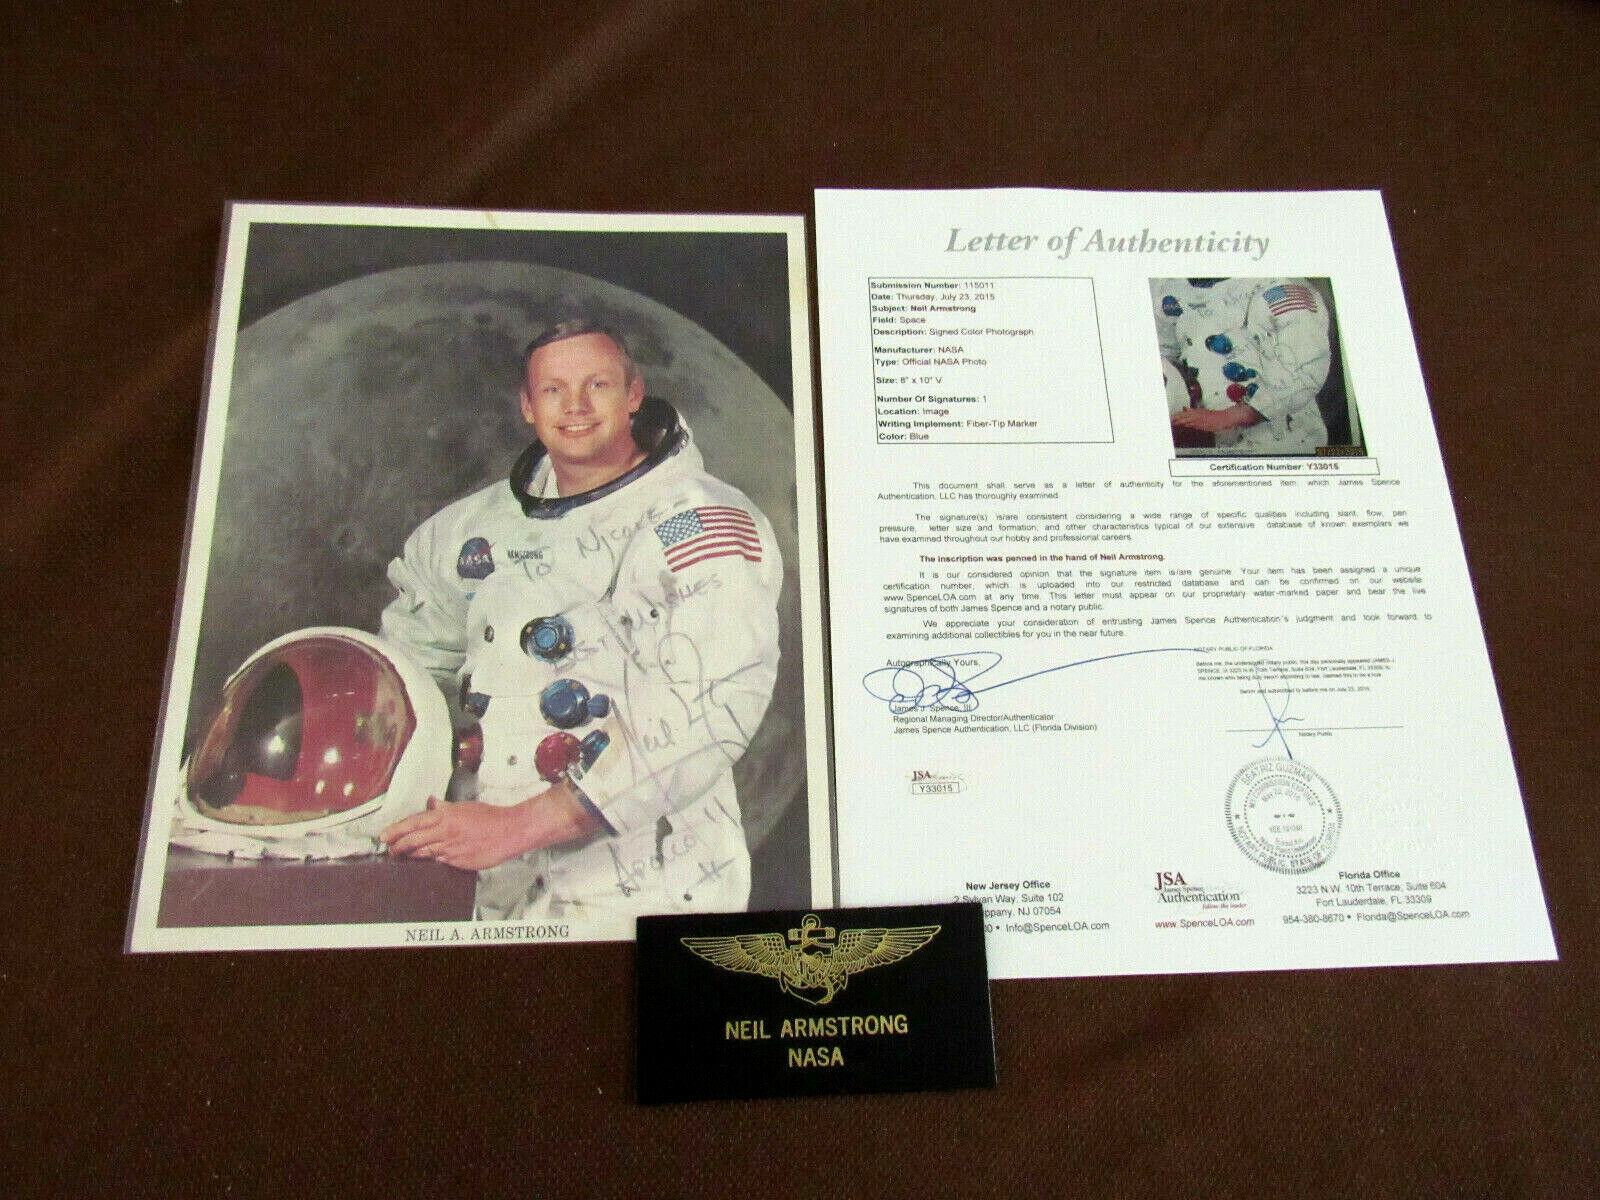 NEIL ARMSTRONG APOLLO 11 FIRST ON THE MOON SIGNED AUTO NASA LITHO PHOTO JSA LTR